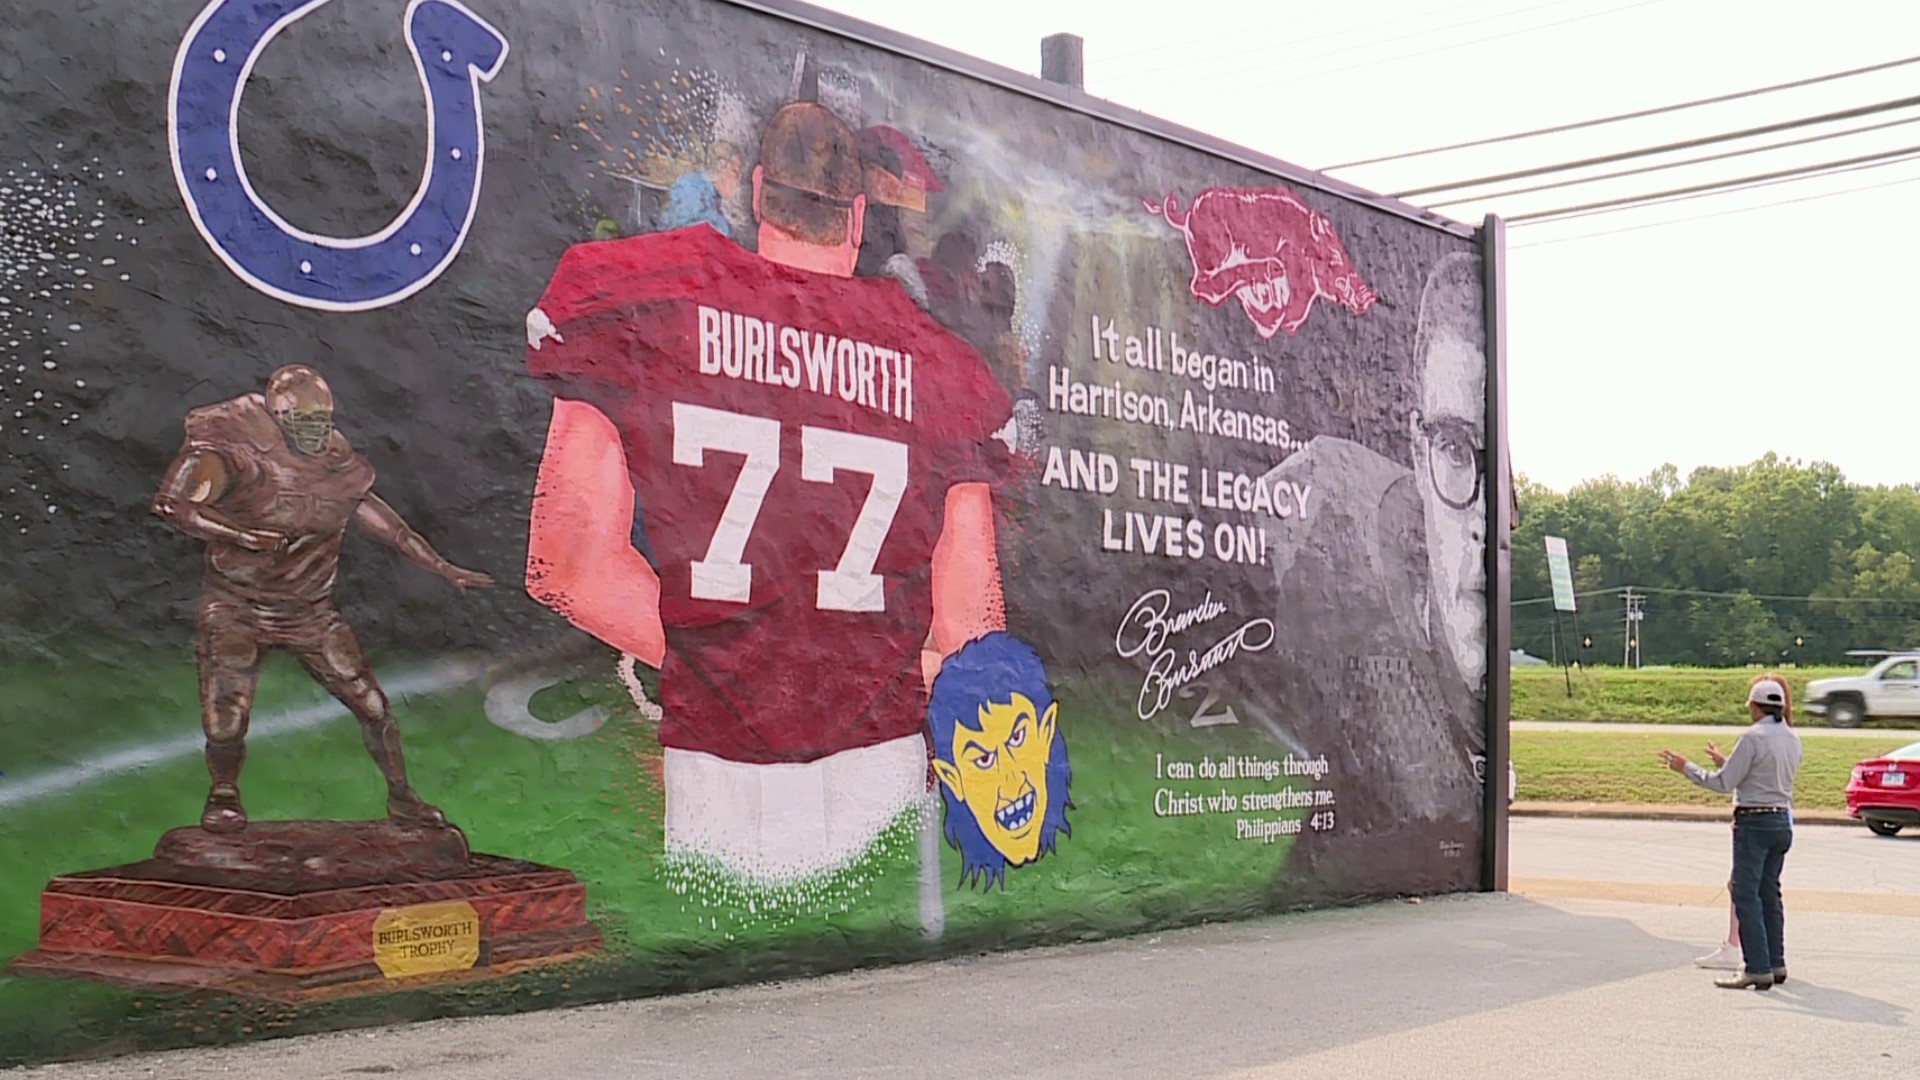 Burlsworth died in a car crash just days after being picked in the NFL draft.